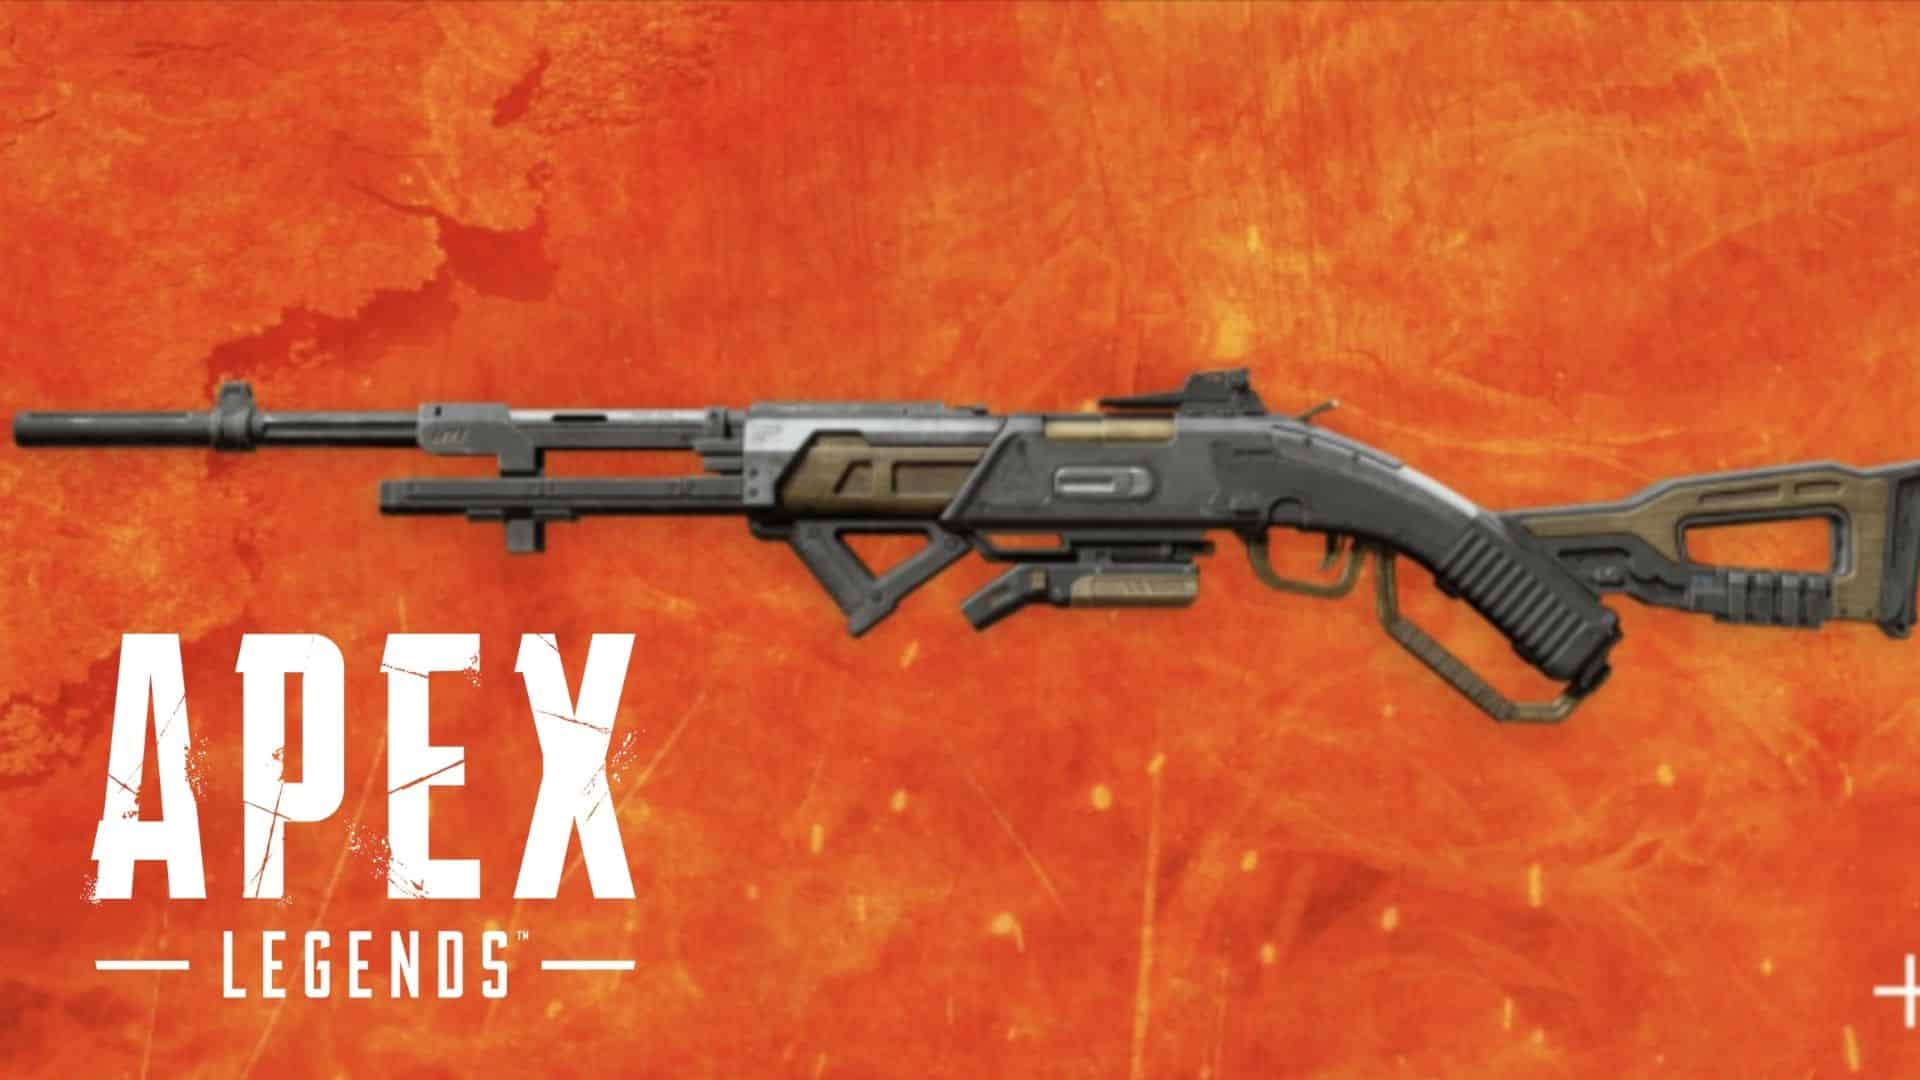 New Apex Legends Season 8 Weapon Revealed: 30 30 Repeater